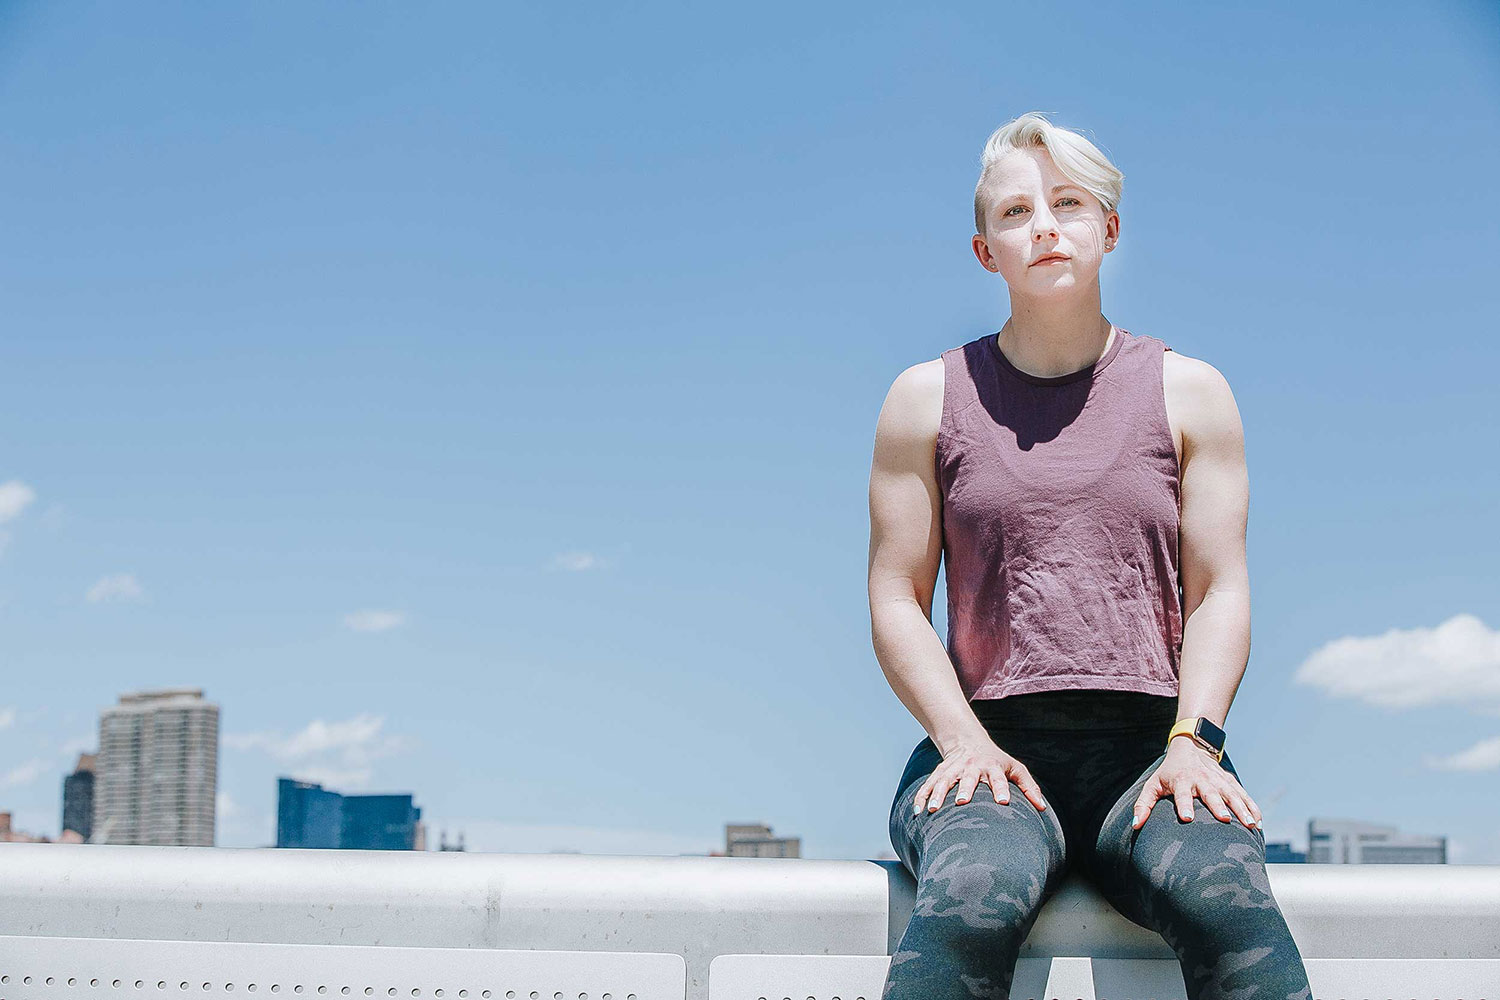 Megan in workout outfit, sitting beneath a blue sky, with hands on thighs.